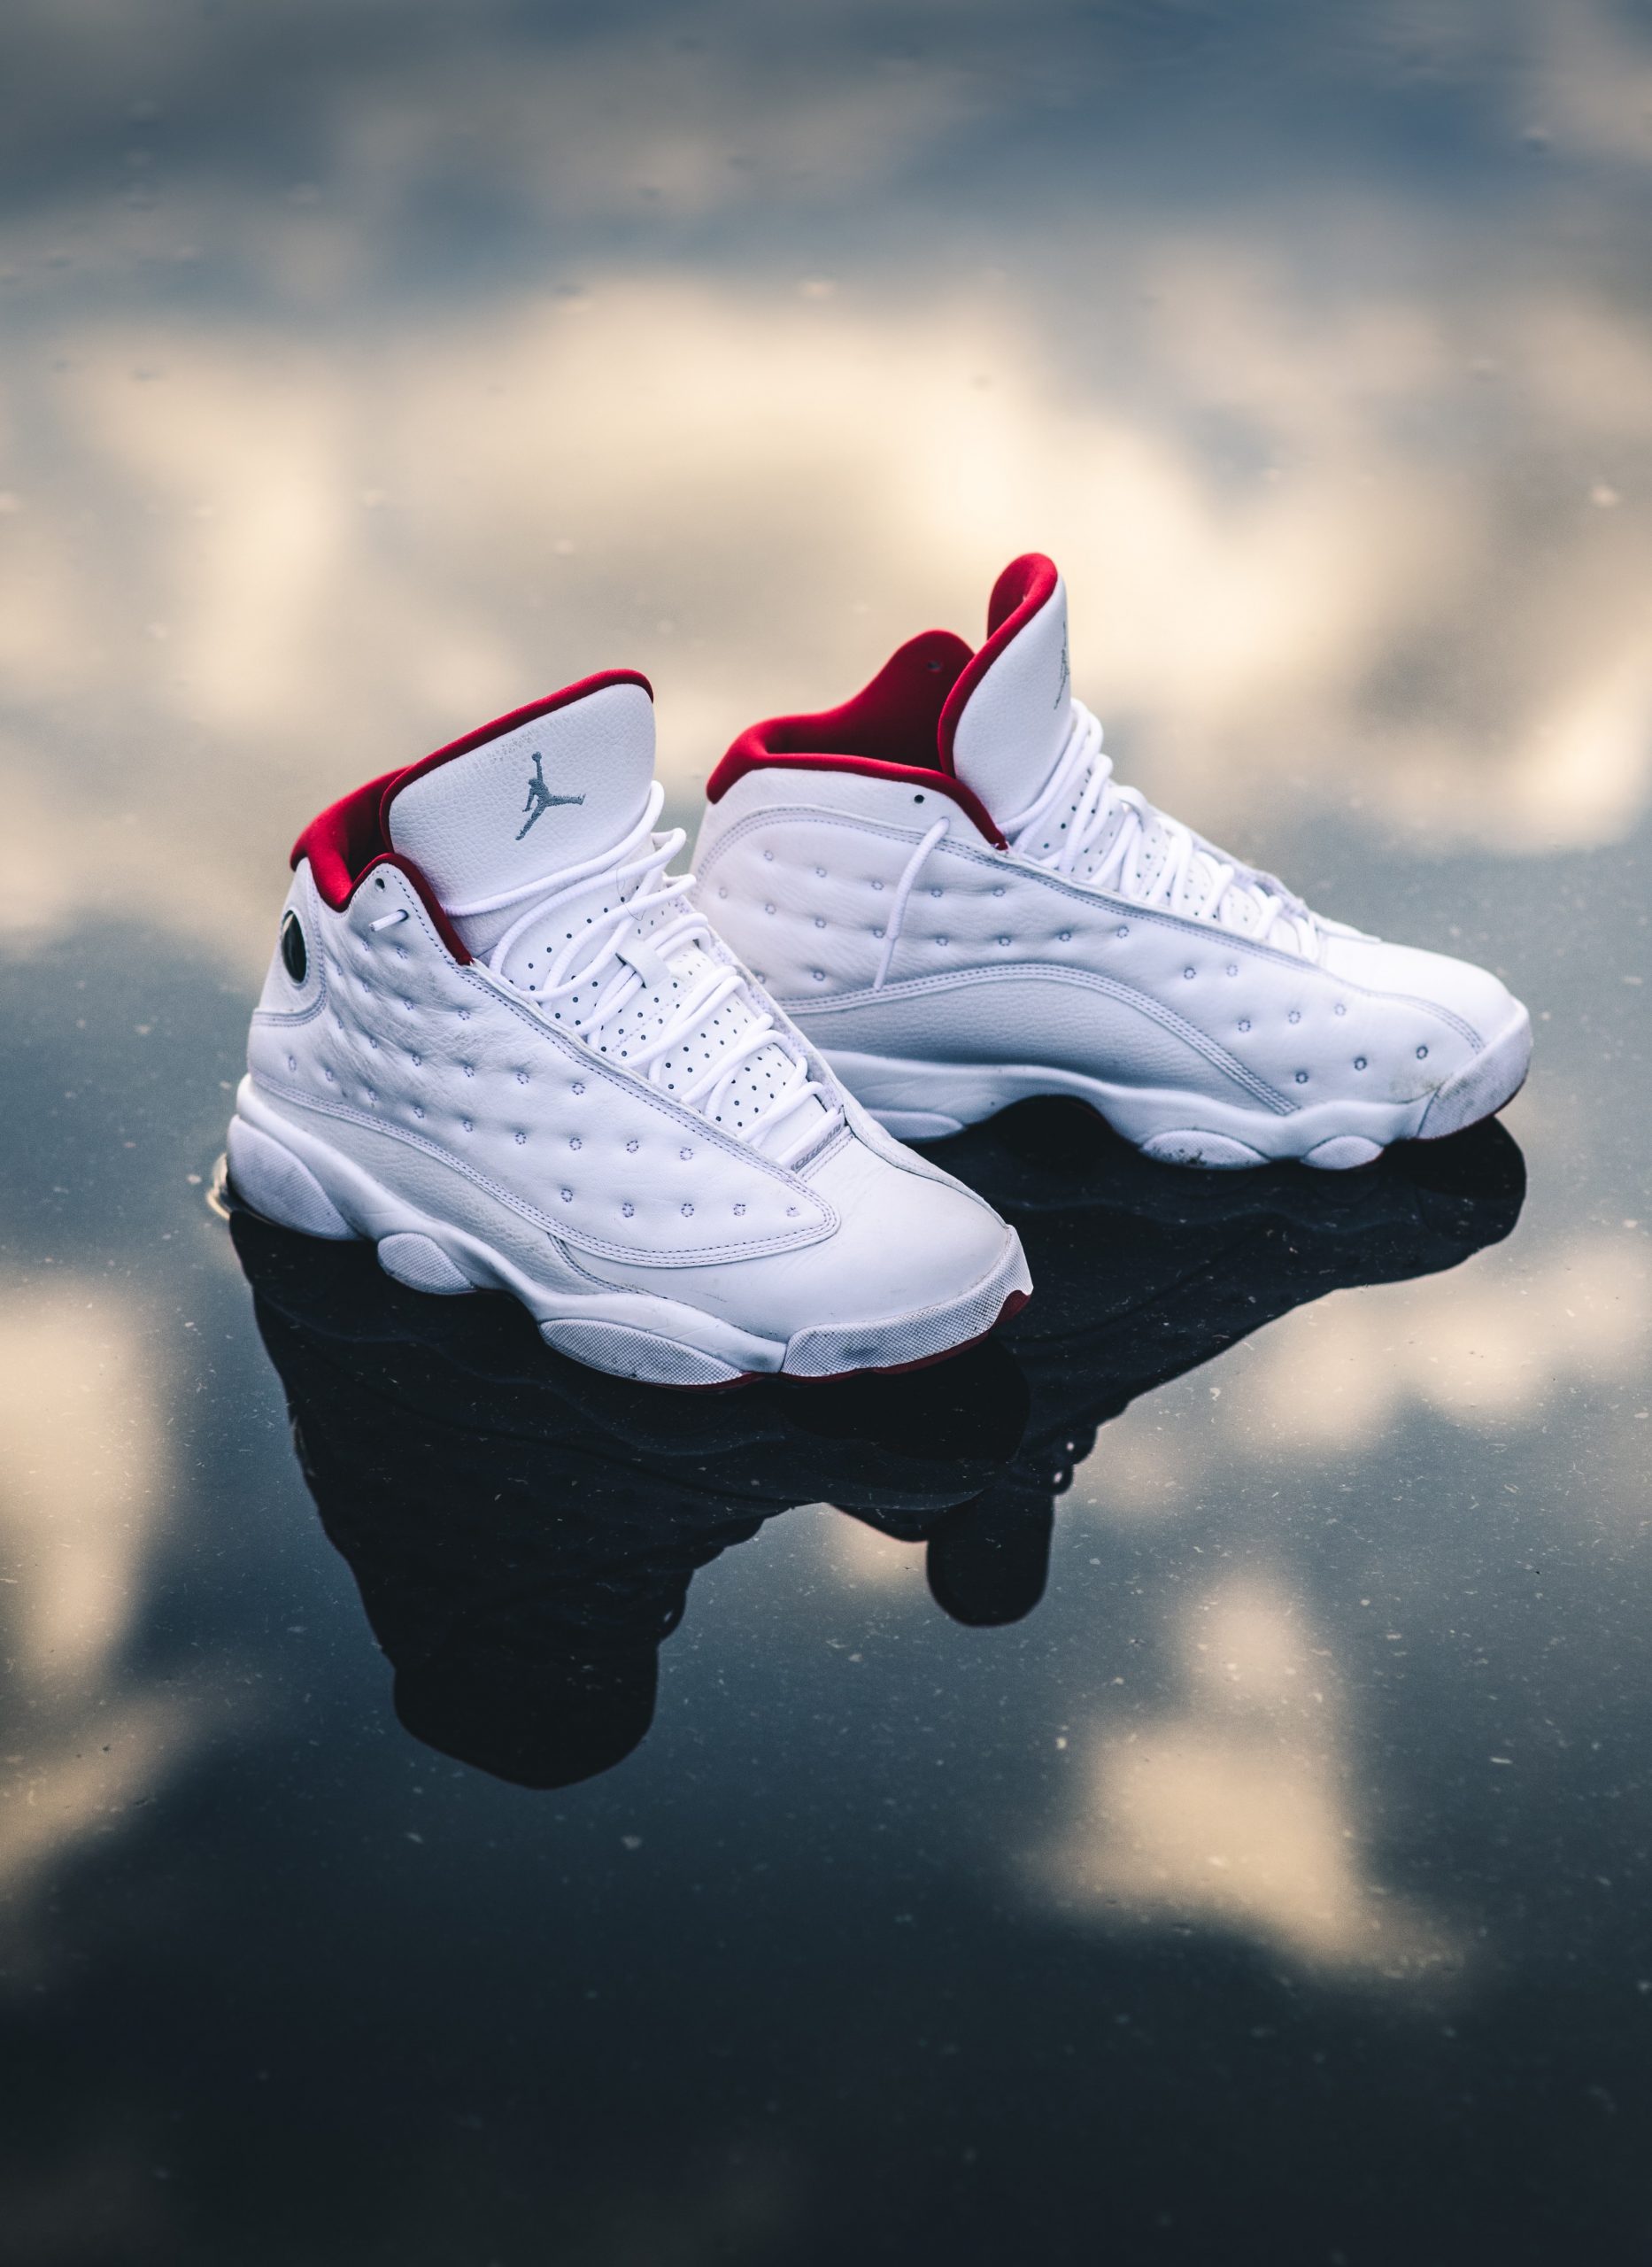 White-and-red Air Jordan 13's